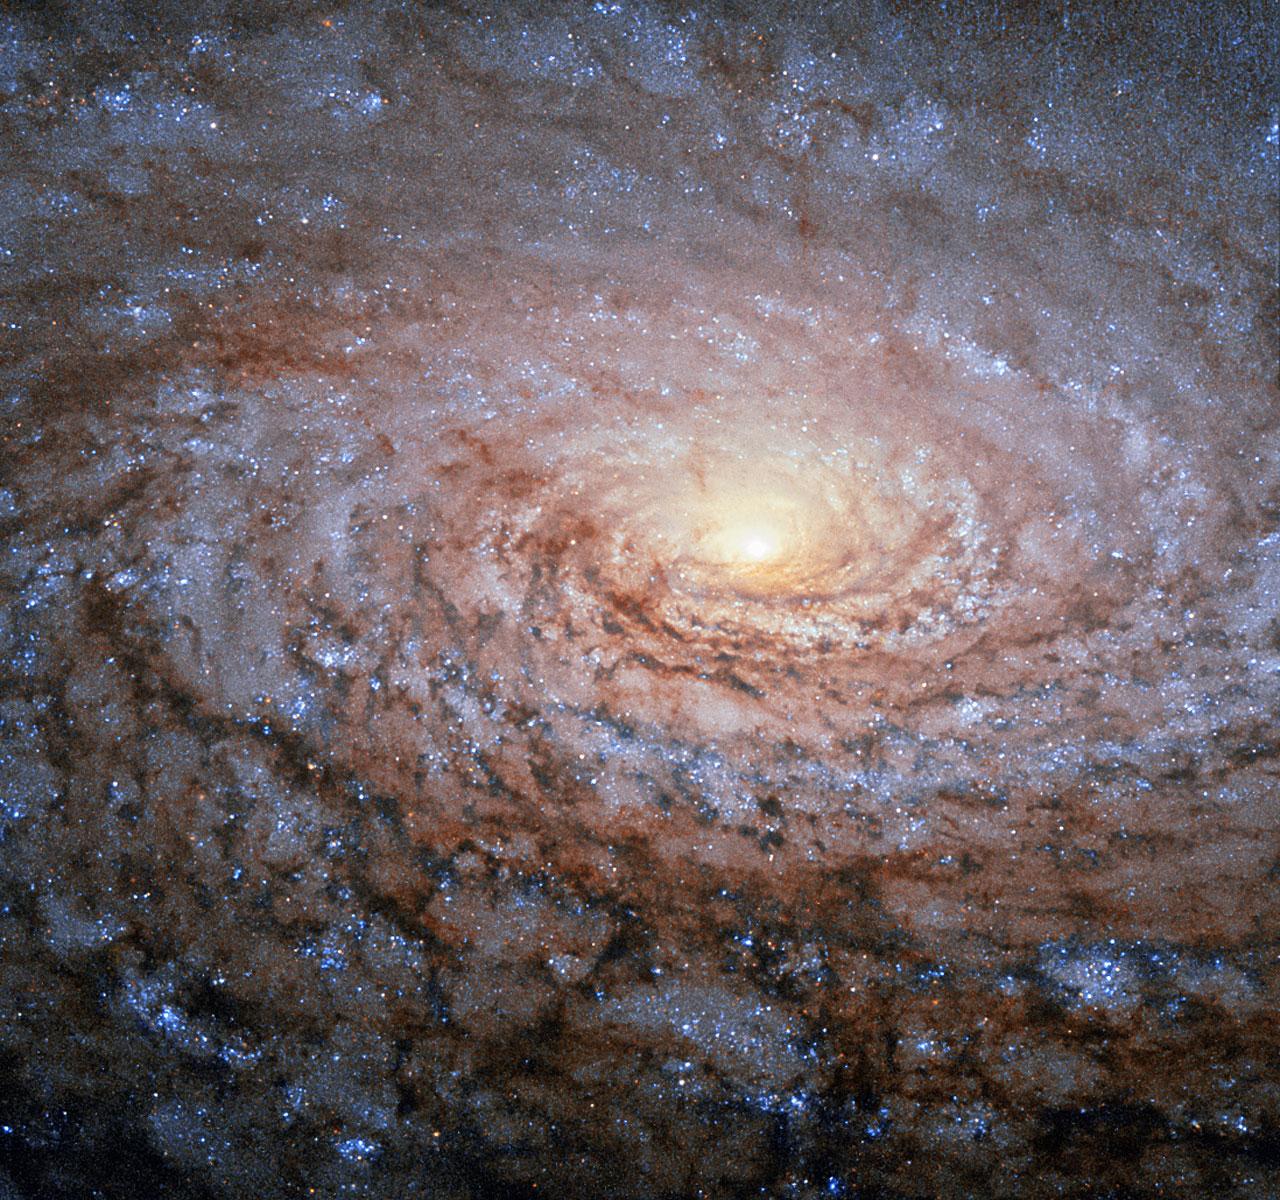 Image of the Sunflower Galaxy. Swirl of reds, blues, and whites around a bright center.